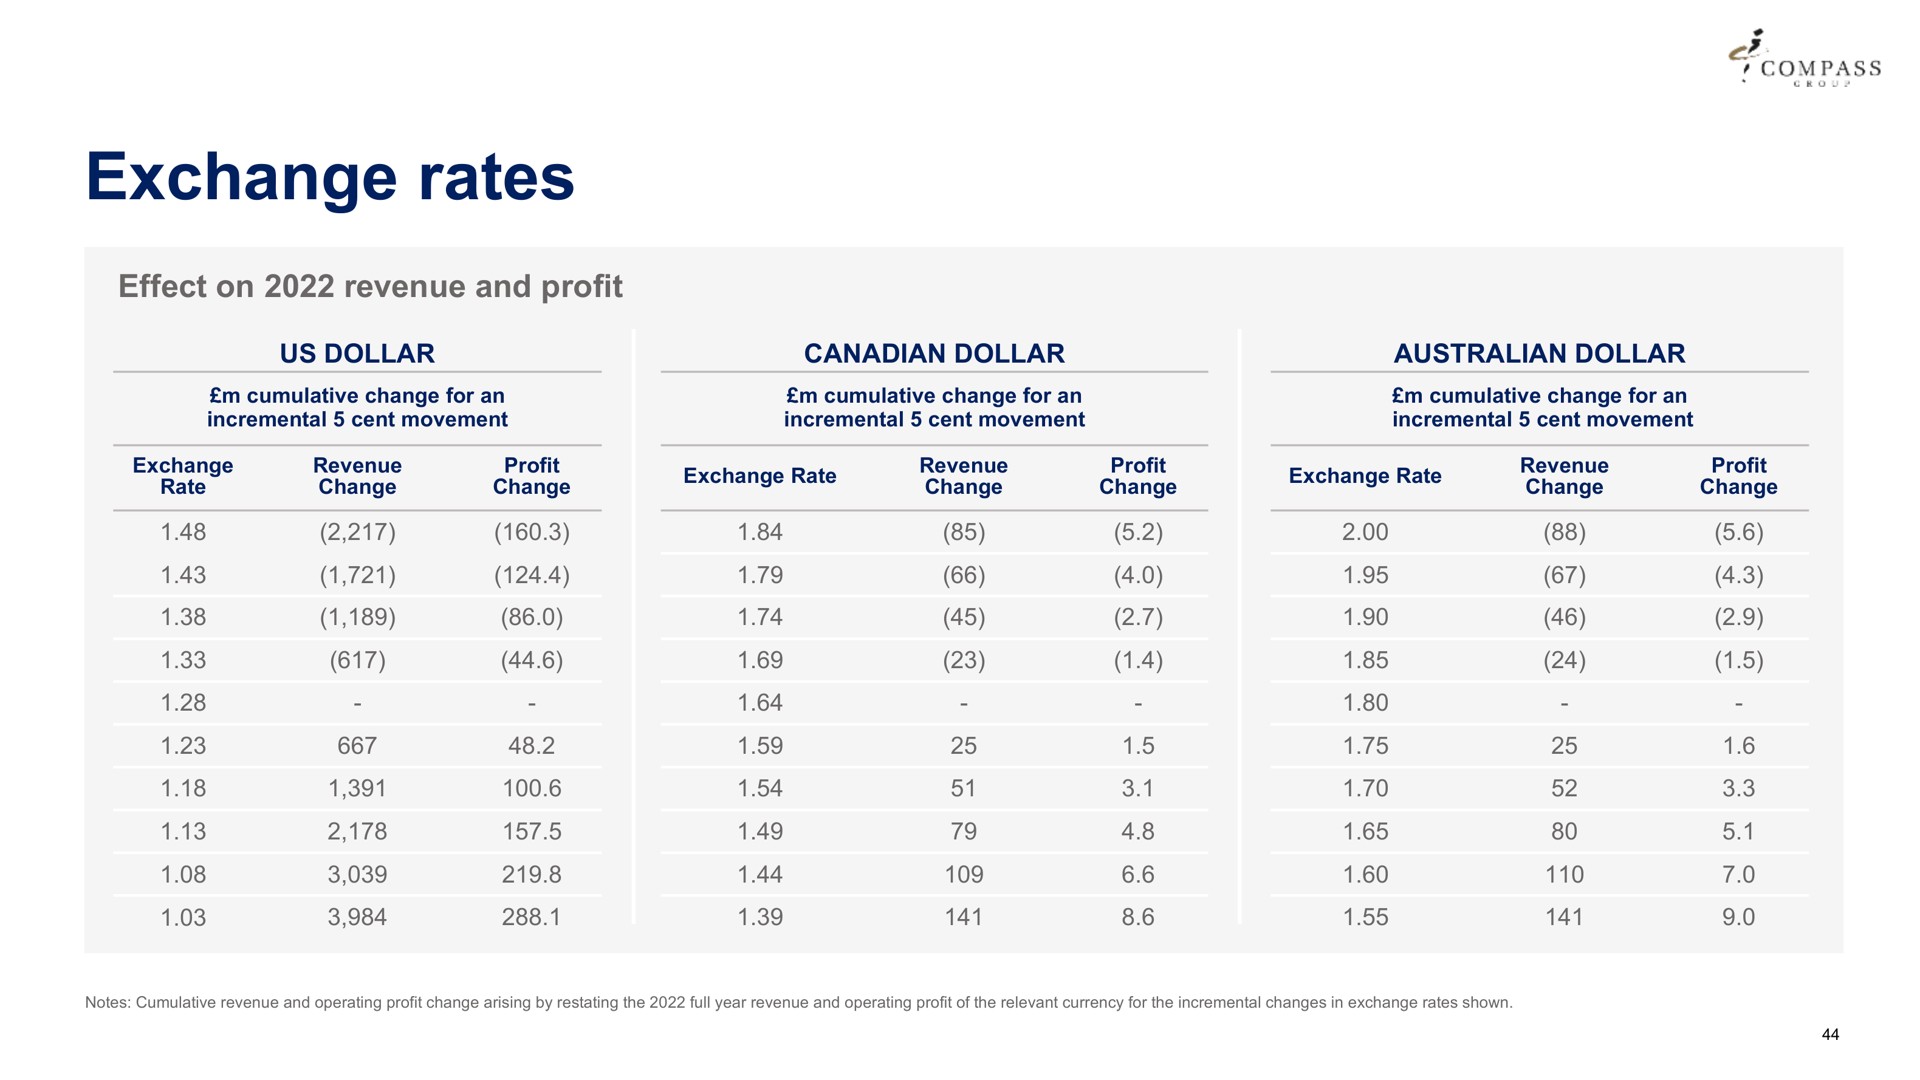 exchange rates effect on revenue and profit a compass rate profit rate revenue prof revenue raft | Compass Group